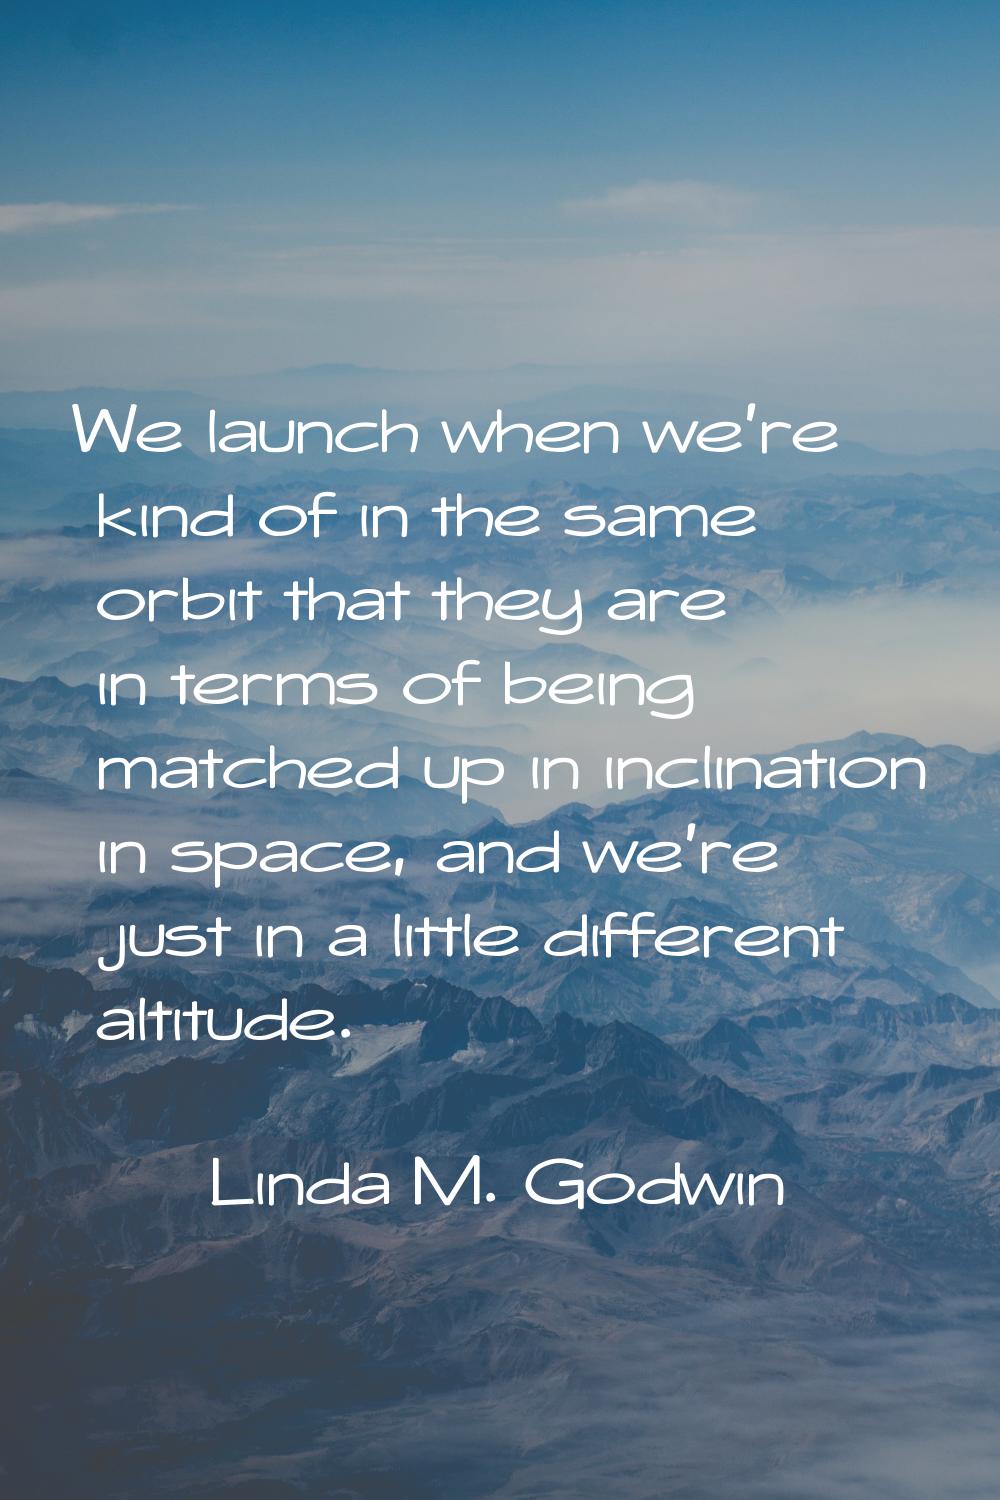 We launch when we're kind of in the same orbit that they are in terms of being matched up in inclin